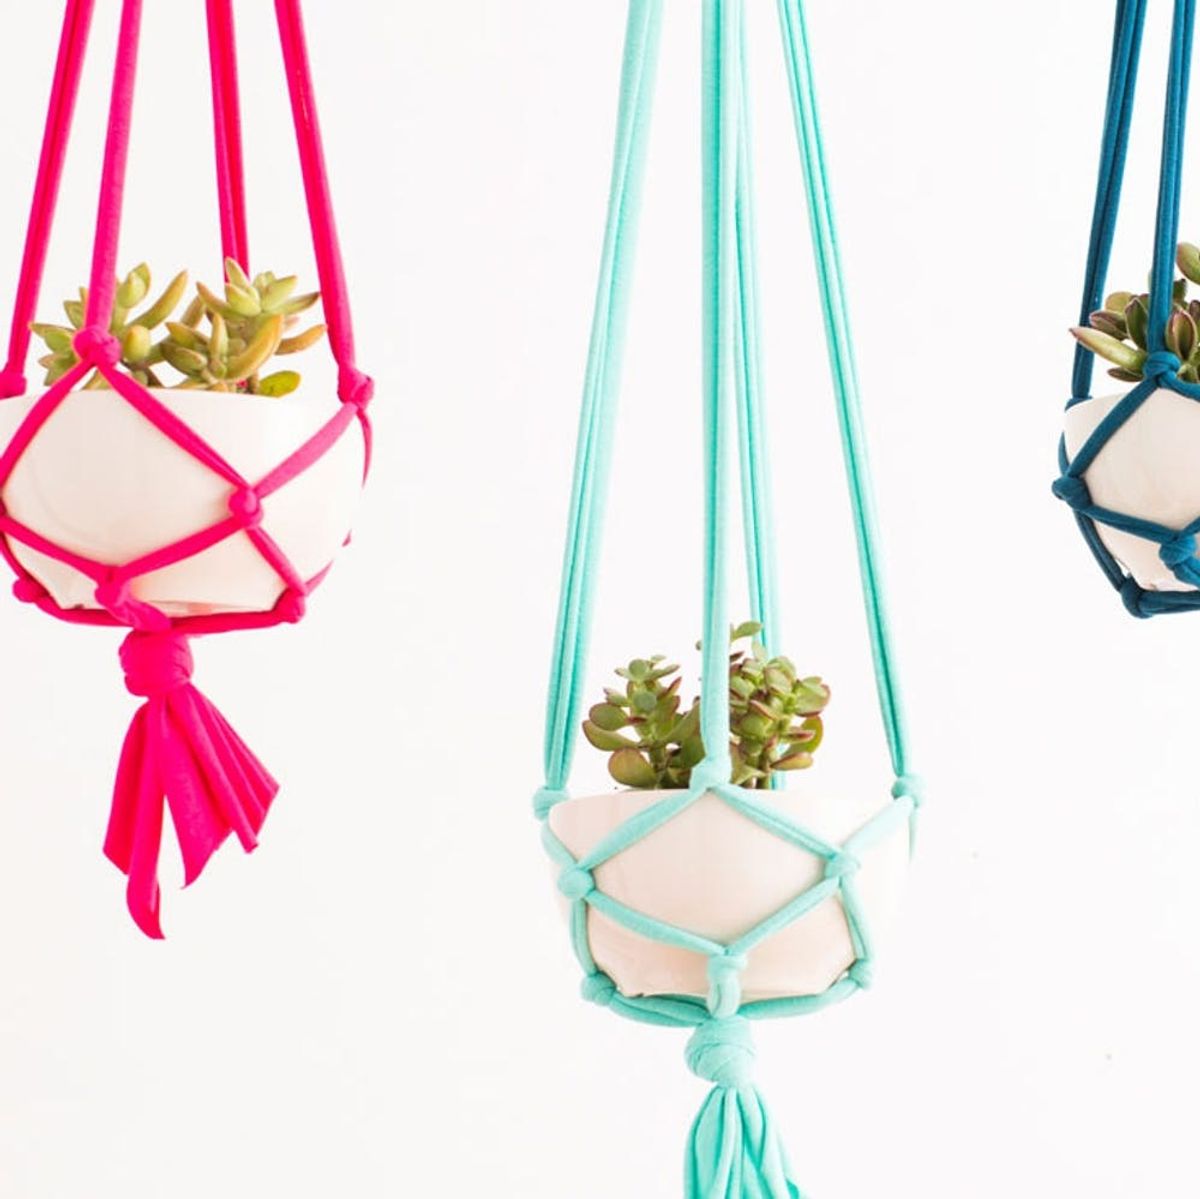 Want to Learn How to Macrame? There’s a Class for That